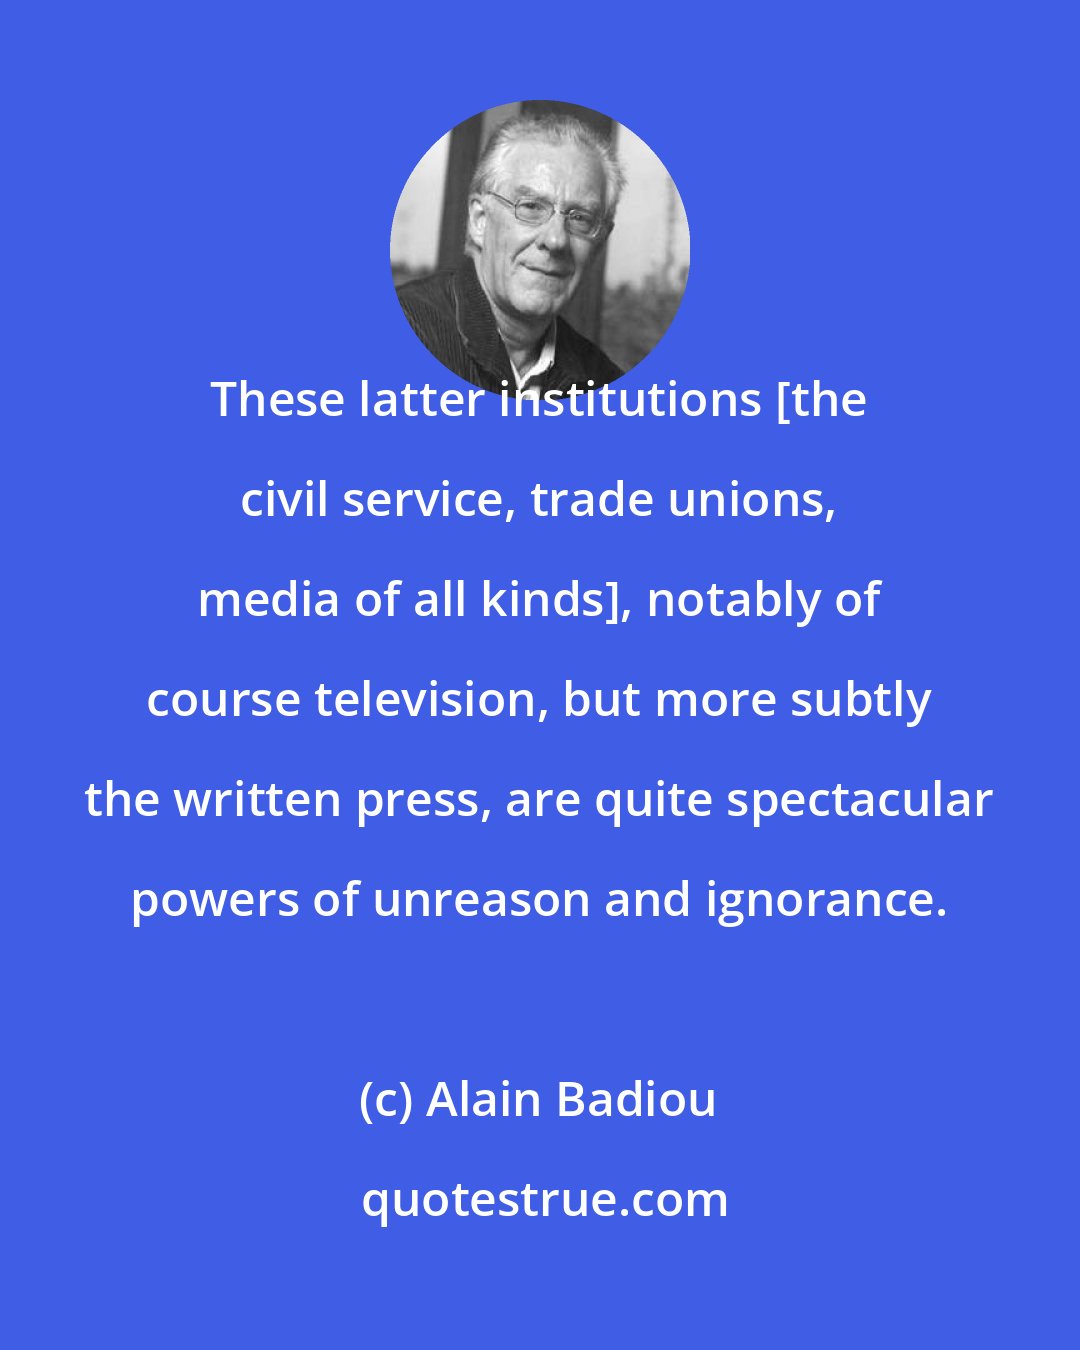 Alain Badiou: These latter institutions [the civil service, trade unions, media of all kinds], notably of course television, but more subtly the written press, are quite spectacular powers of unreason and ignorance.